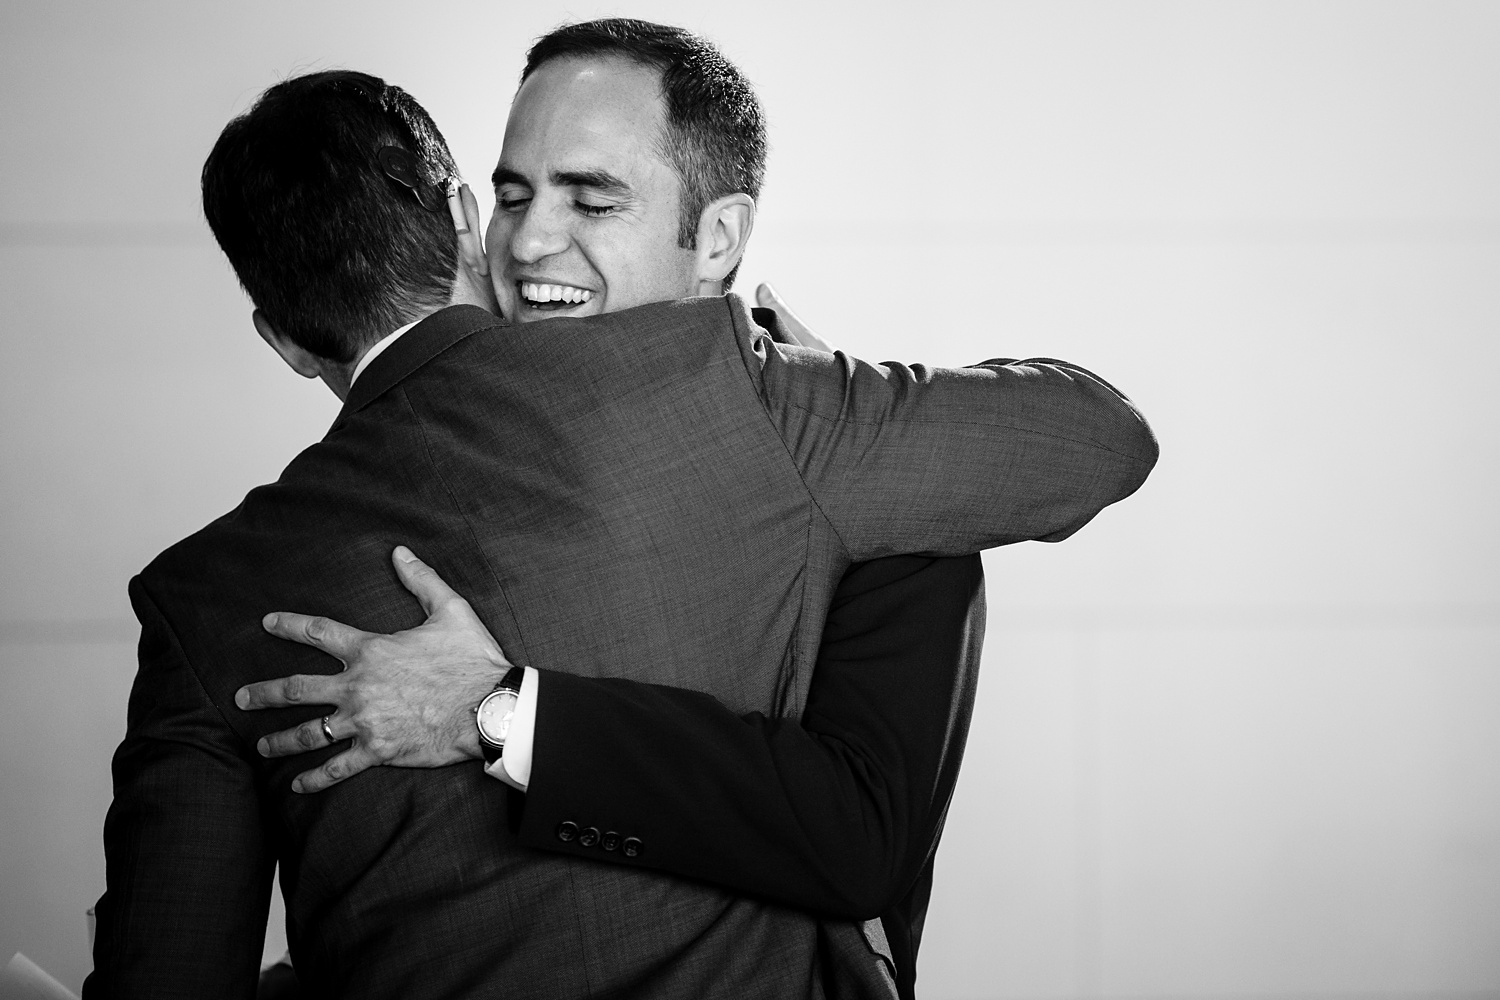 Brothers give each other a hug after a touching wedding toast